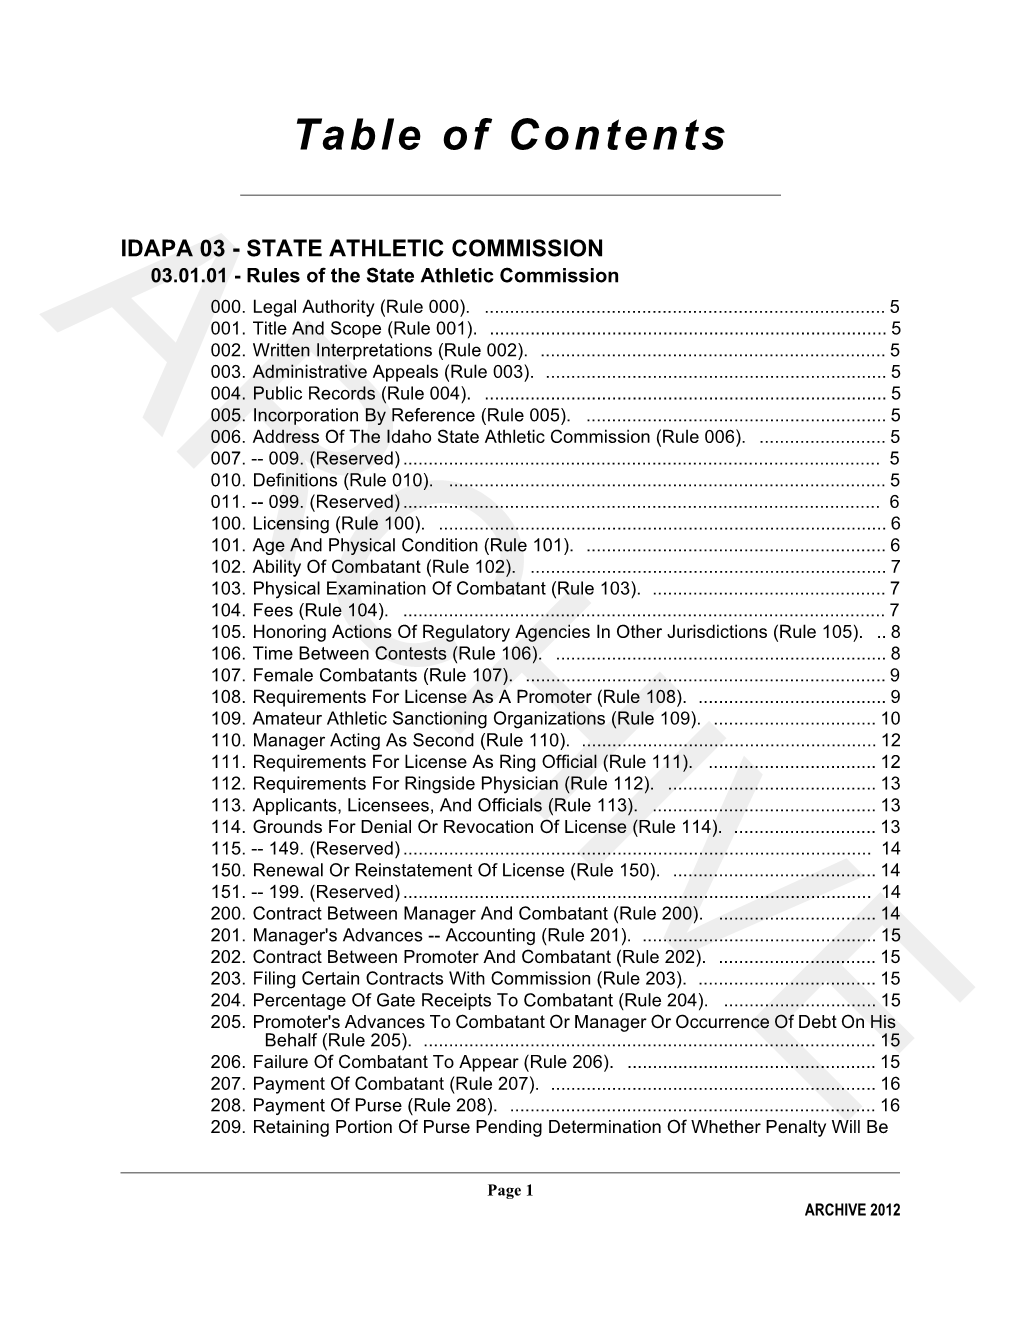 03.01.01, Rules Governing the Idaho State Athletic Commission